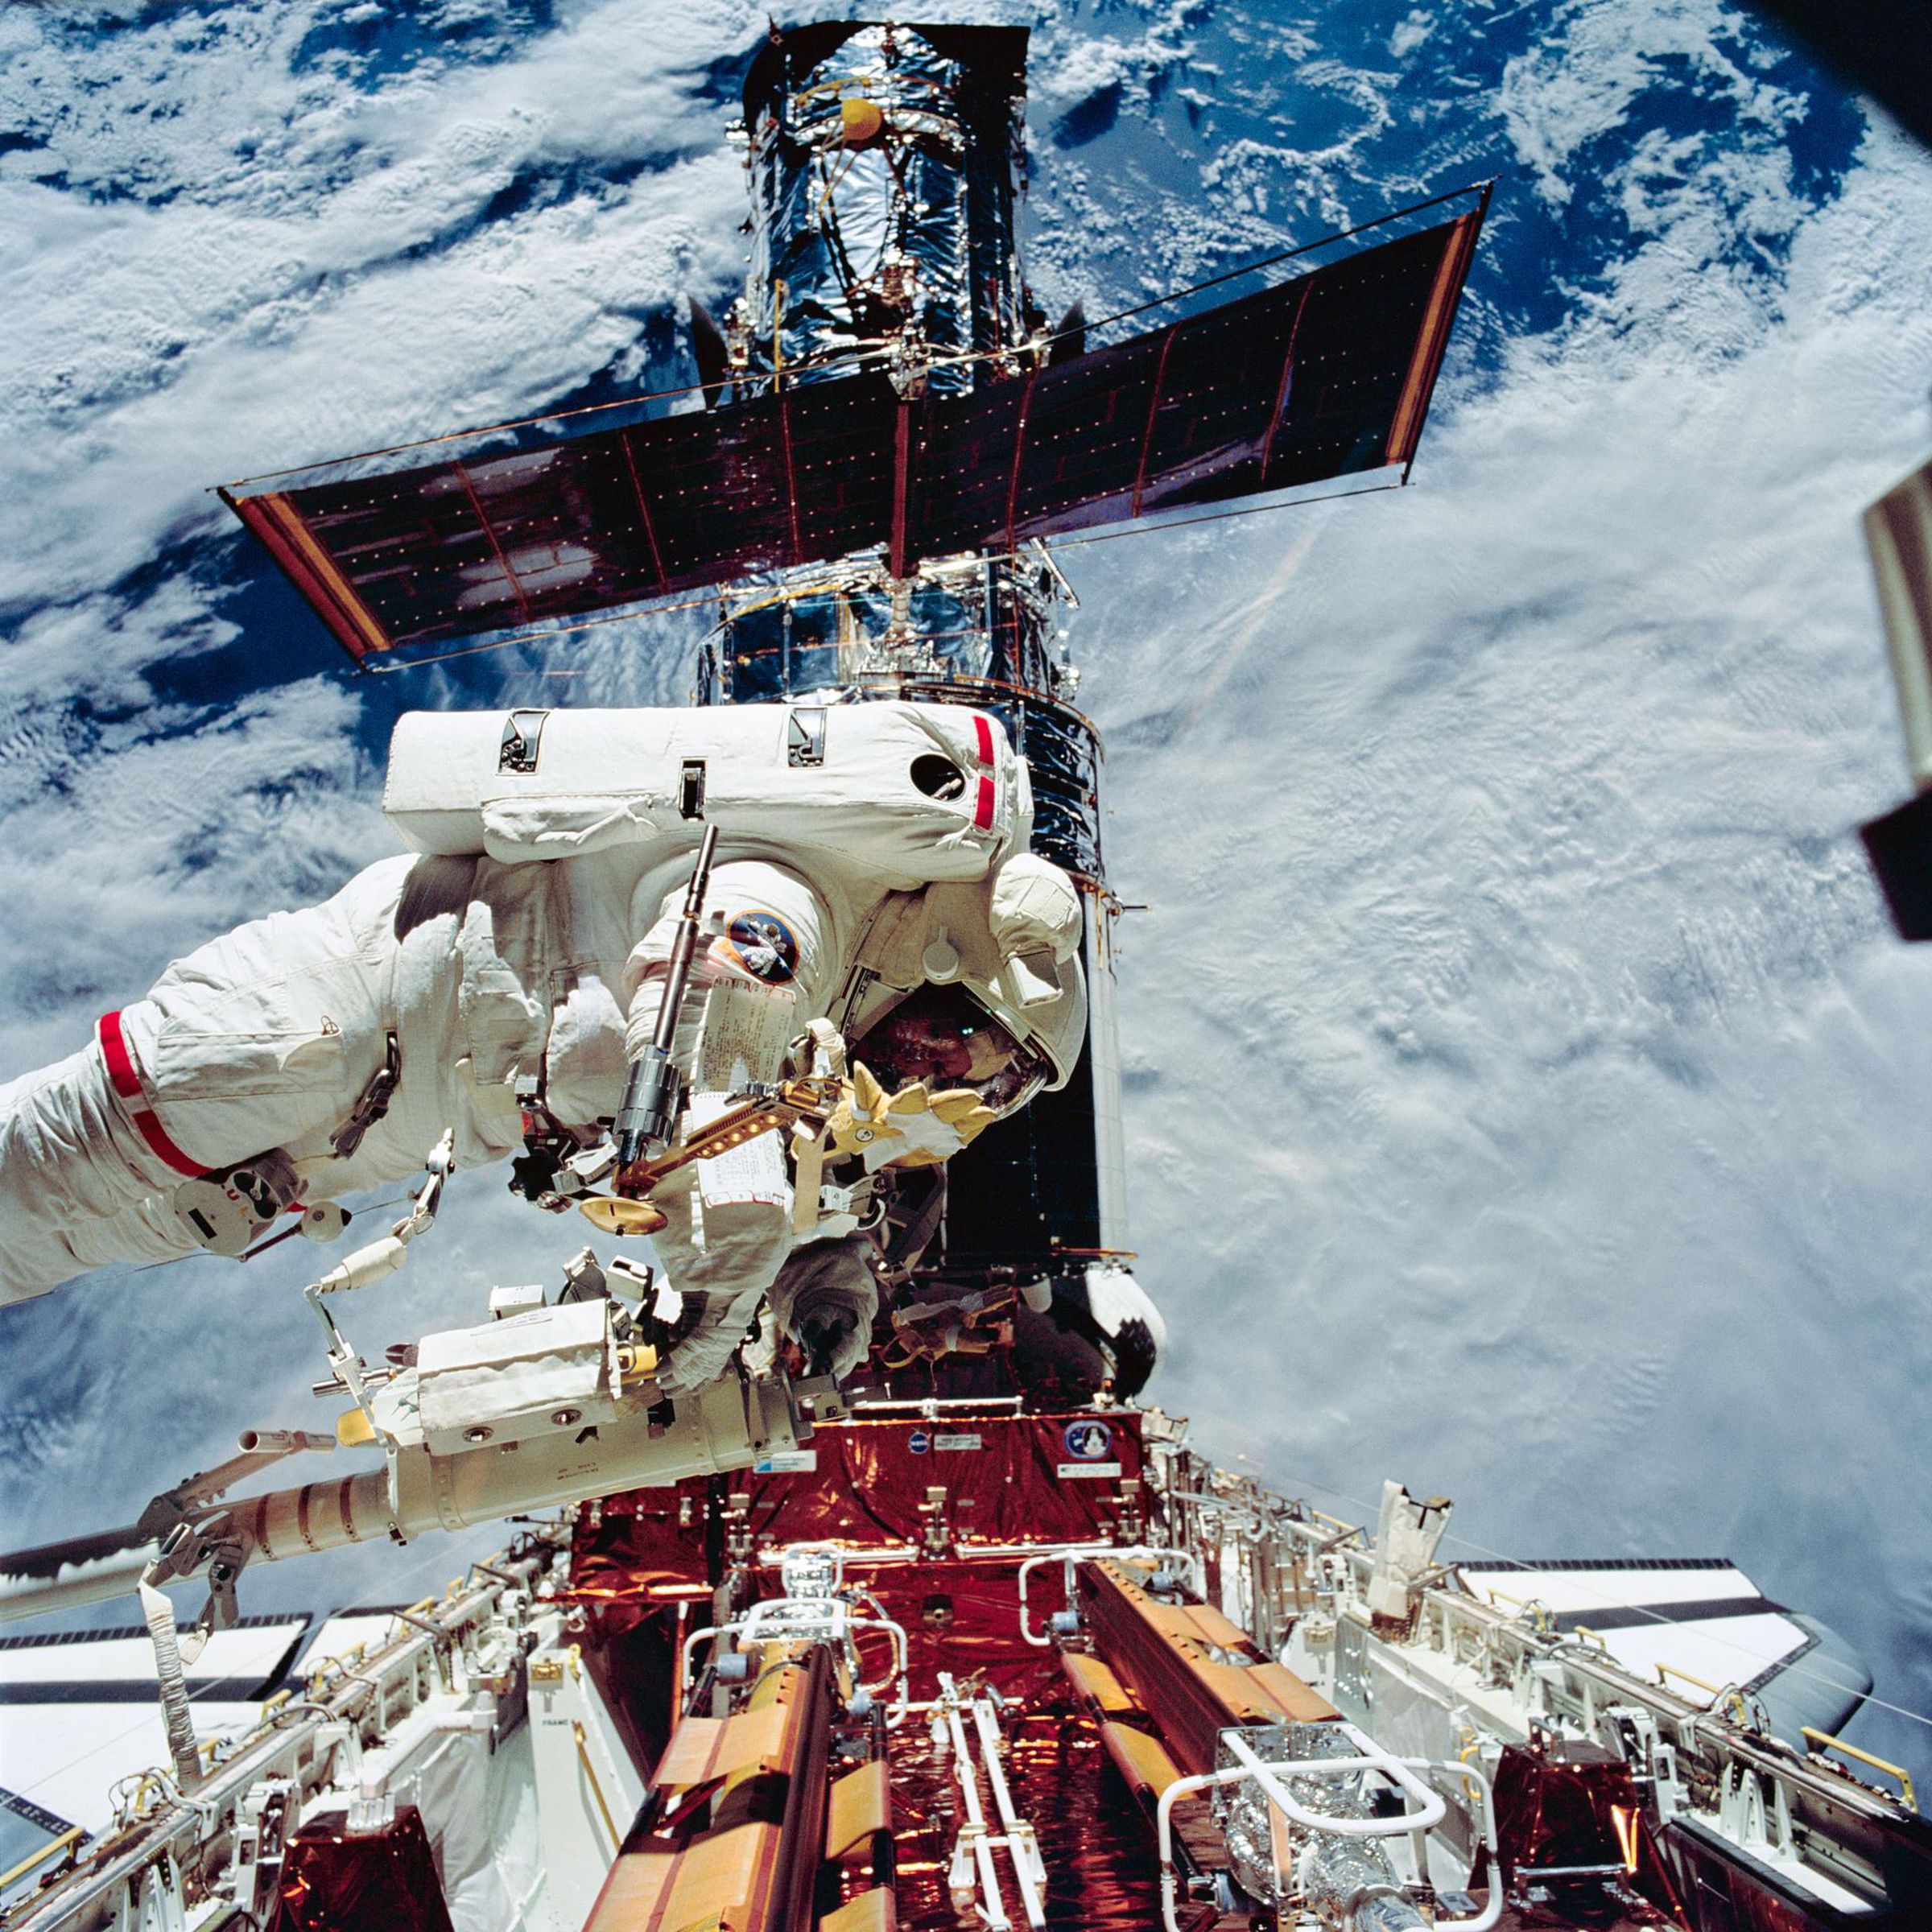 Astronaut Kathryn Thornton on a spacewalk to repair the Hubble Space Telescope in 1993